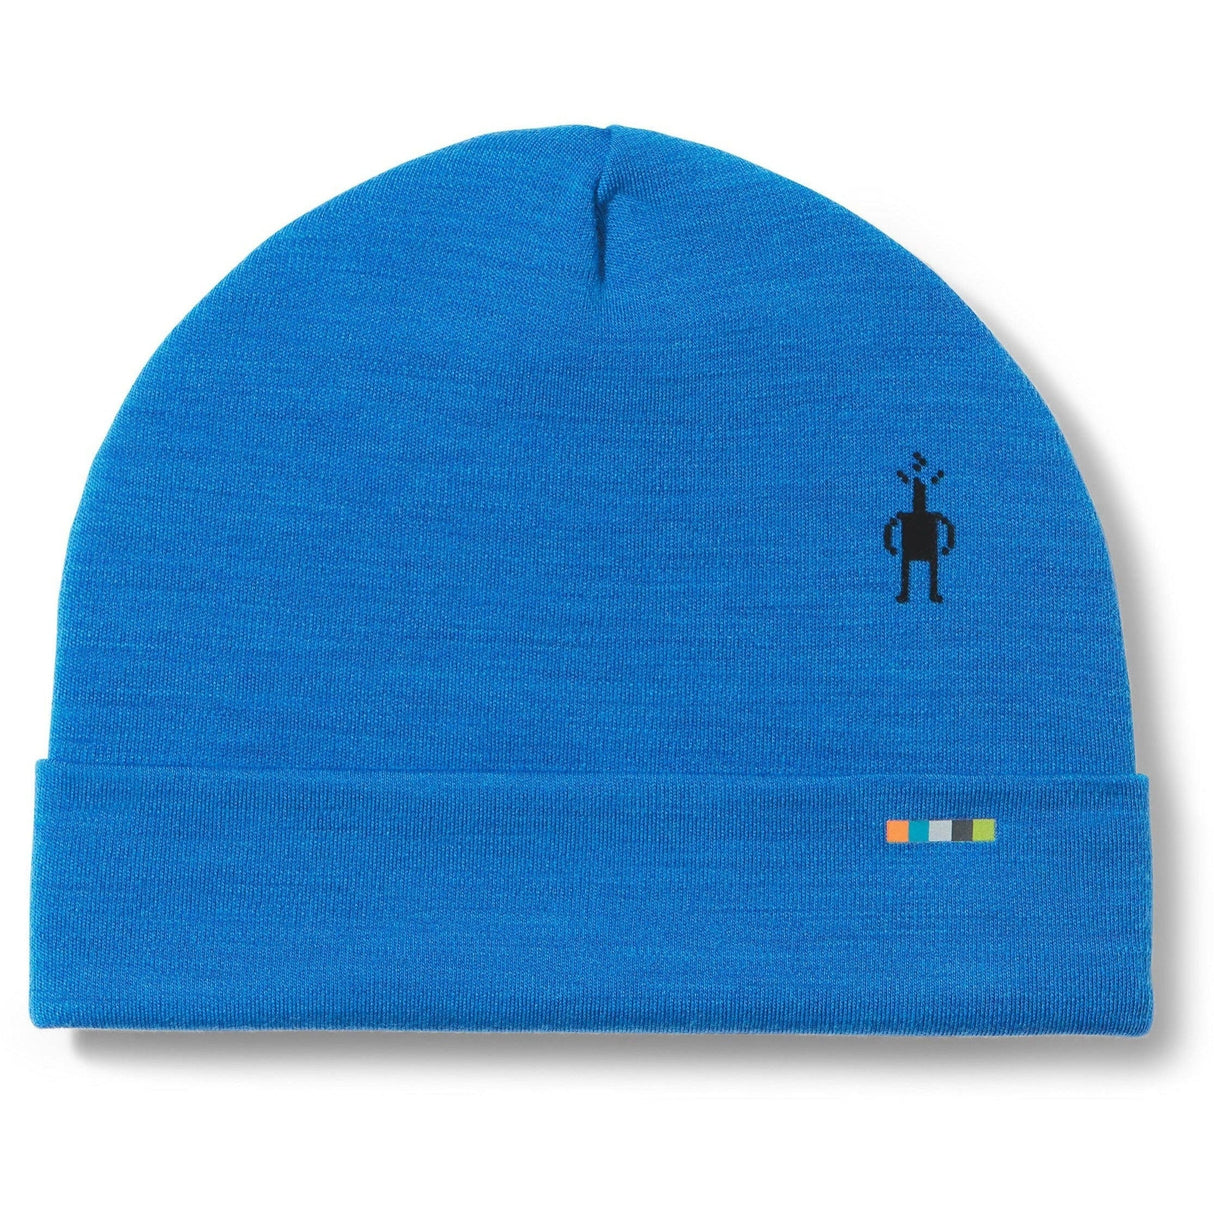 Smartwool Thermal Merino Reversible Cuffed Beanie  -  One Size Fits Most / Laguna Blue Heather